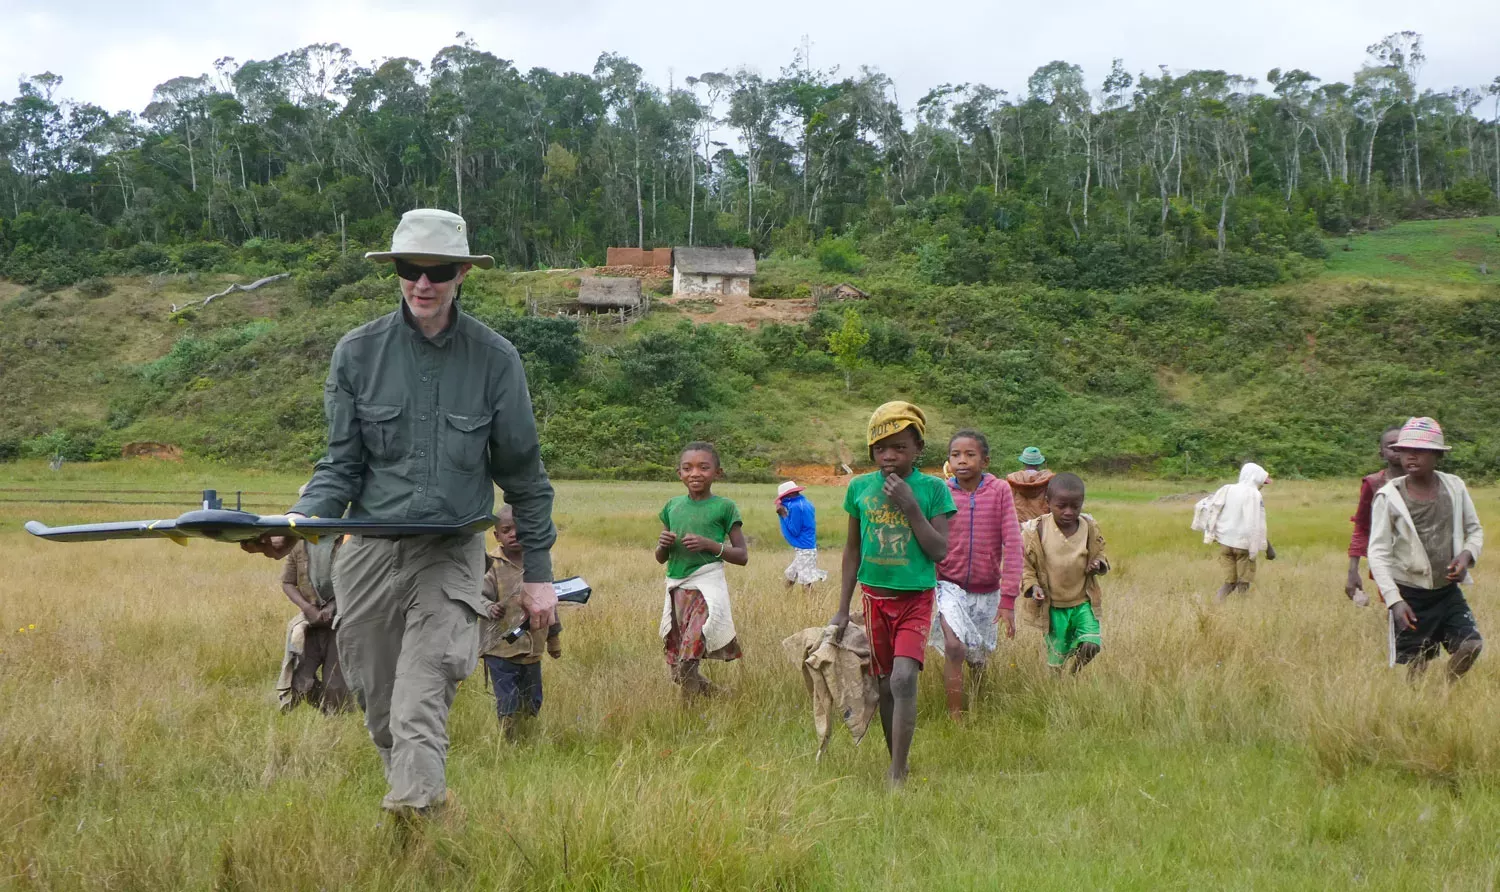 Tim carrying a drone with a group of Madagascan children following.